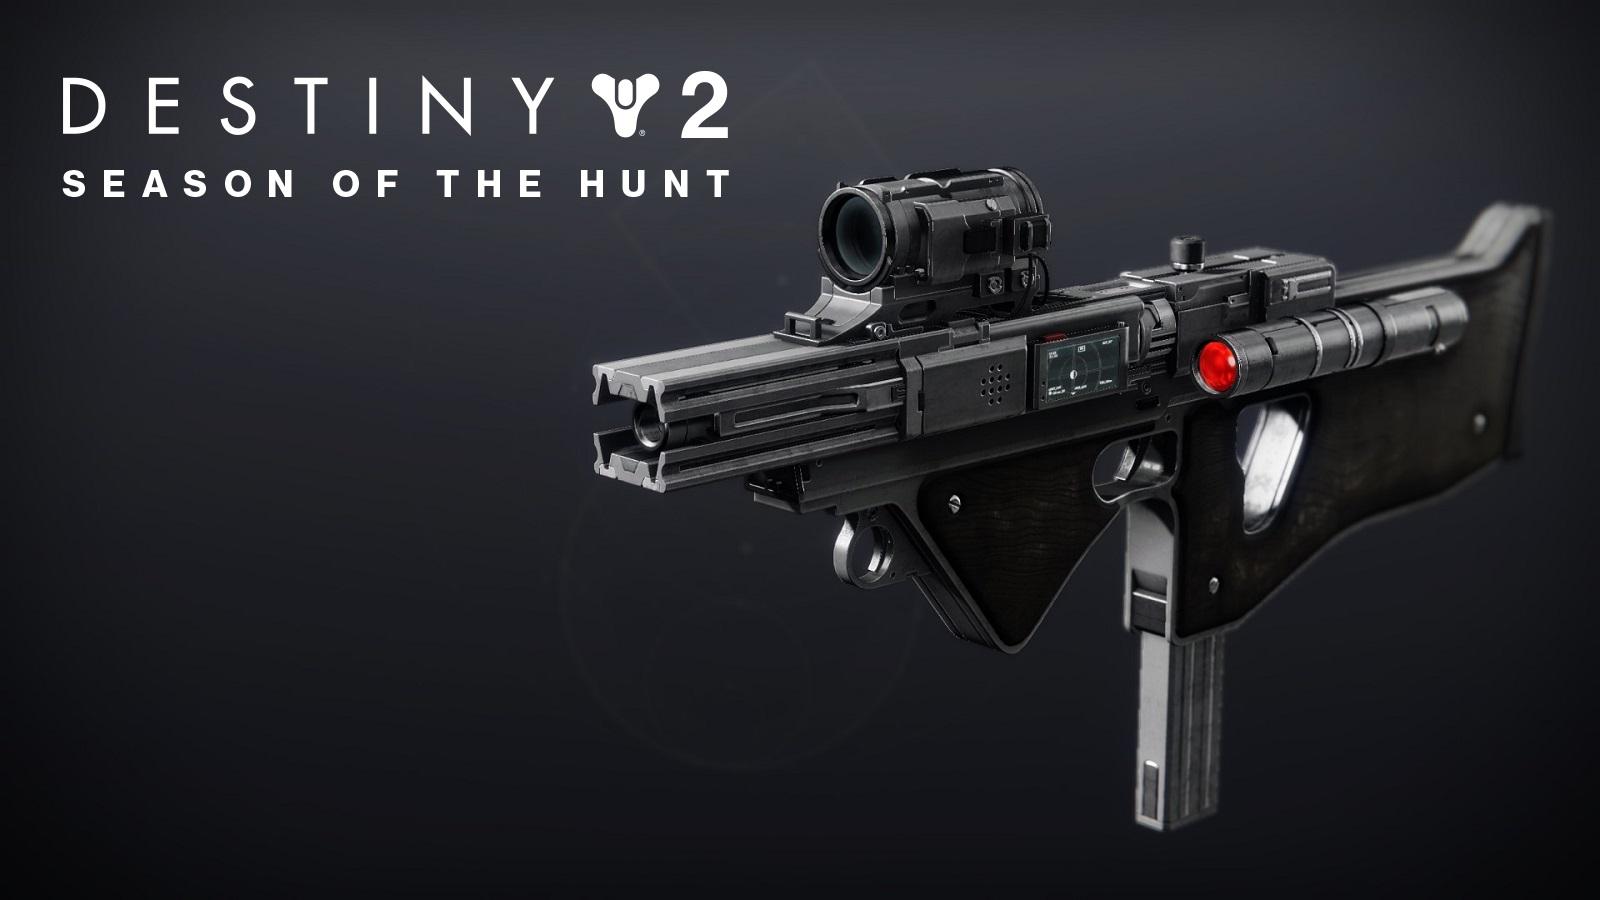 Destiny 2 Beyond Light Friction Fire SMG With Season of the Hunt Text